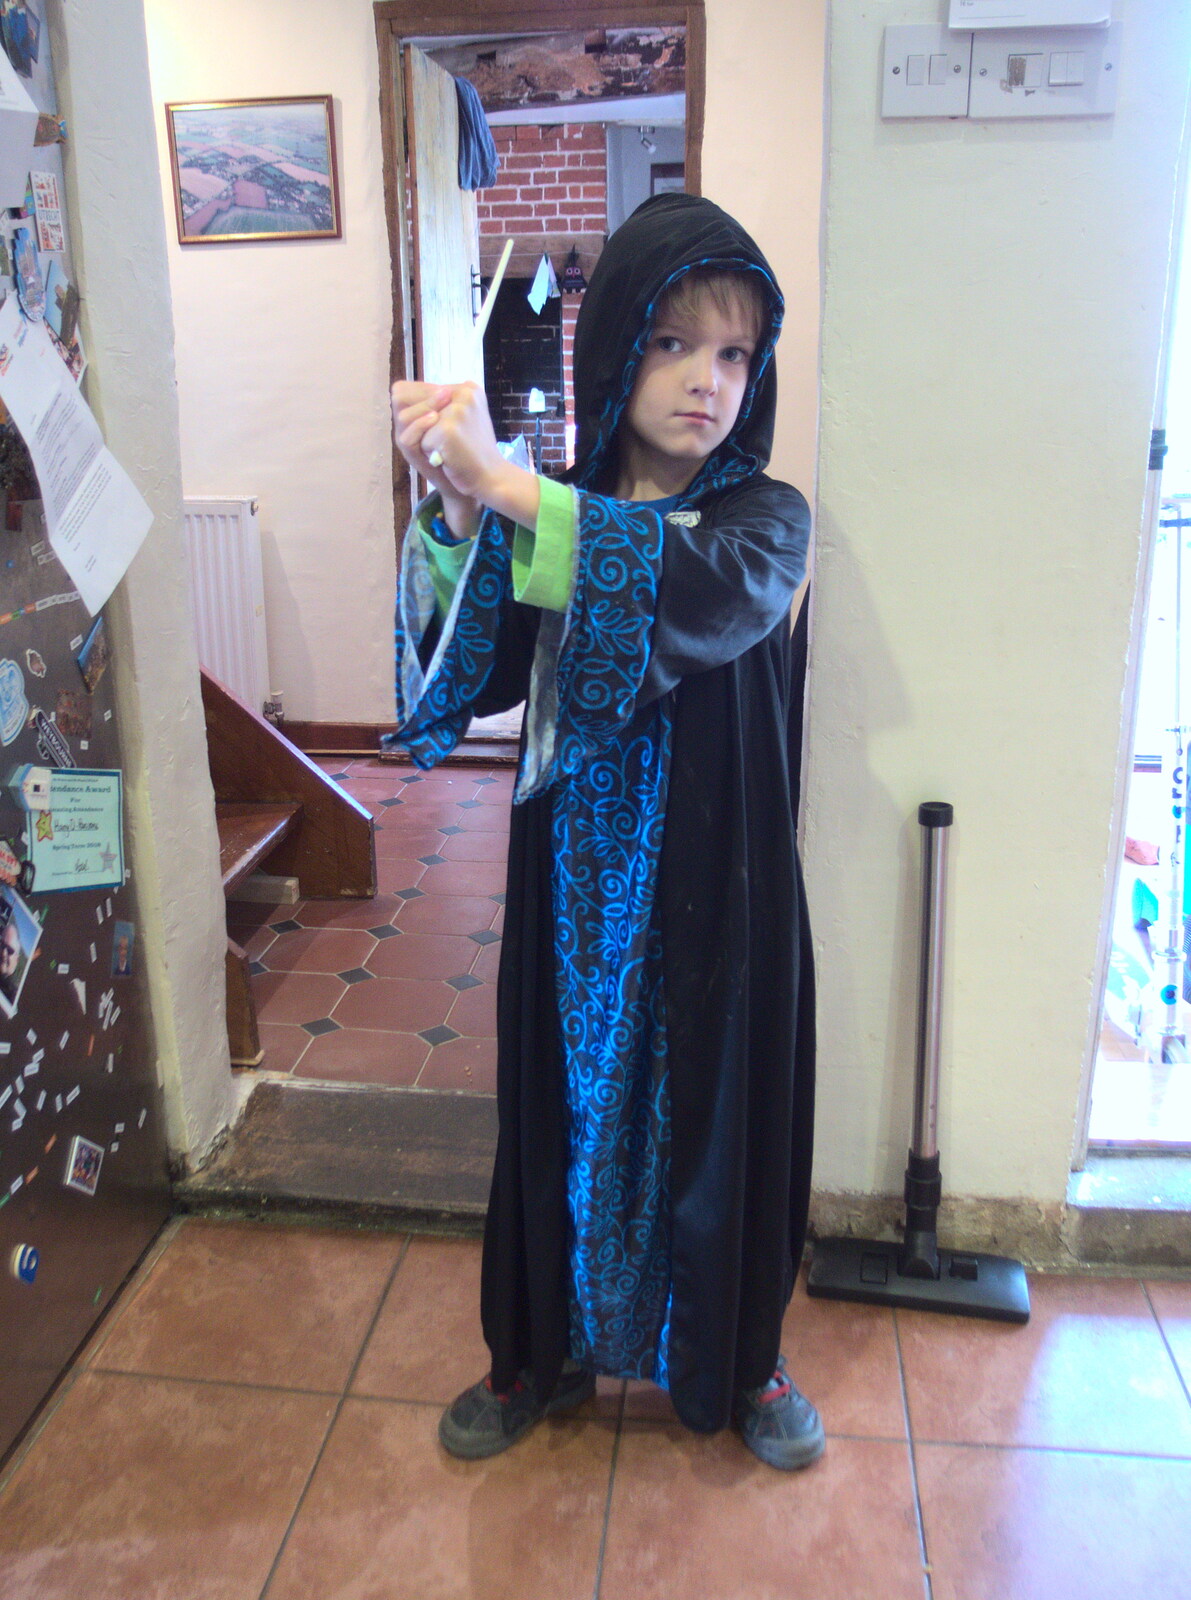 Harry models his wizard costume, with chopstick wand from Evidence of Autumn: Geocaching on Knettishall Heath, Suffolk - 7th October 2018